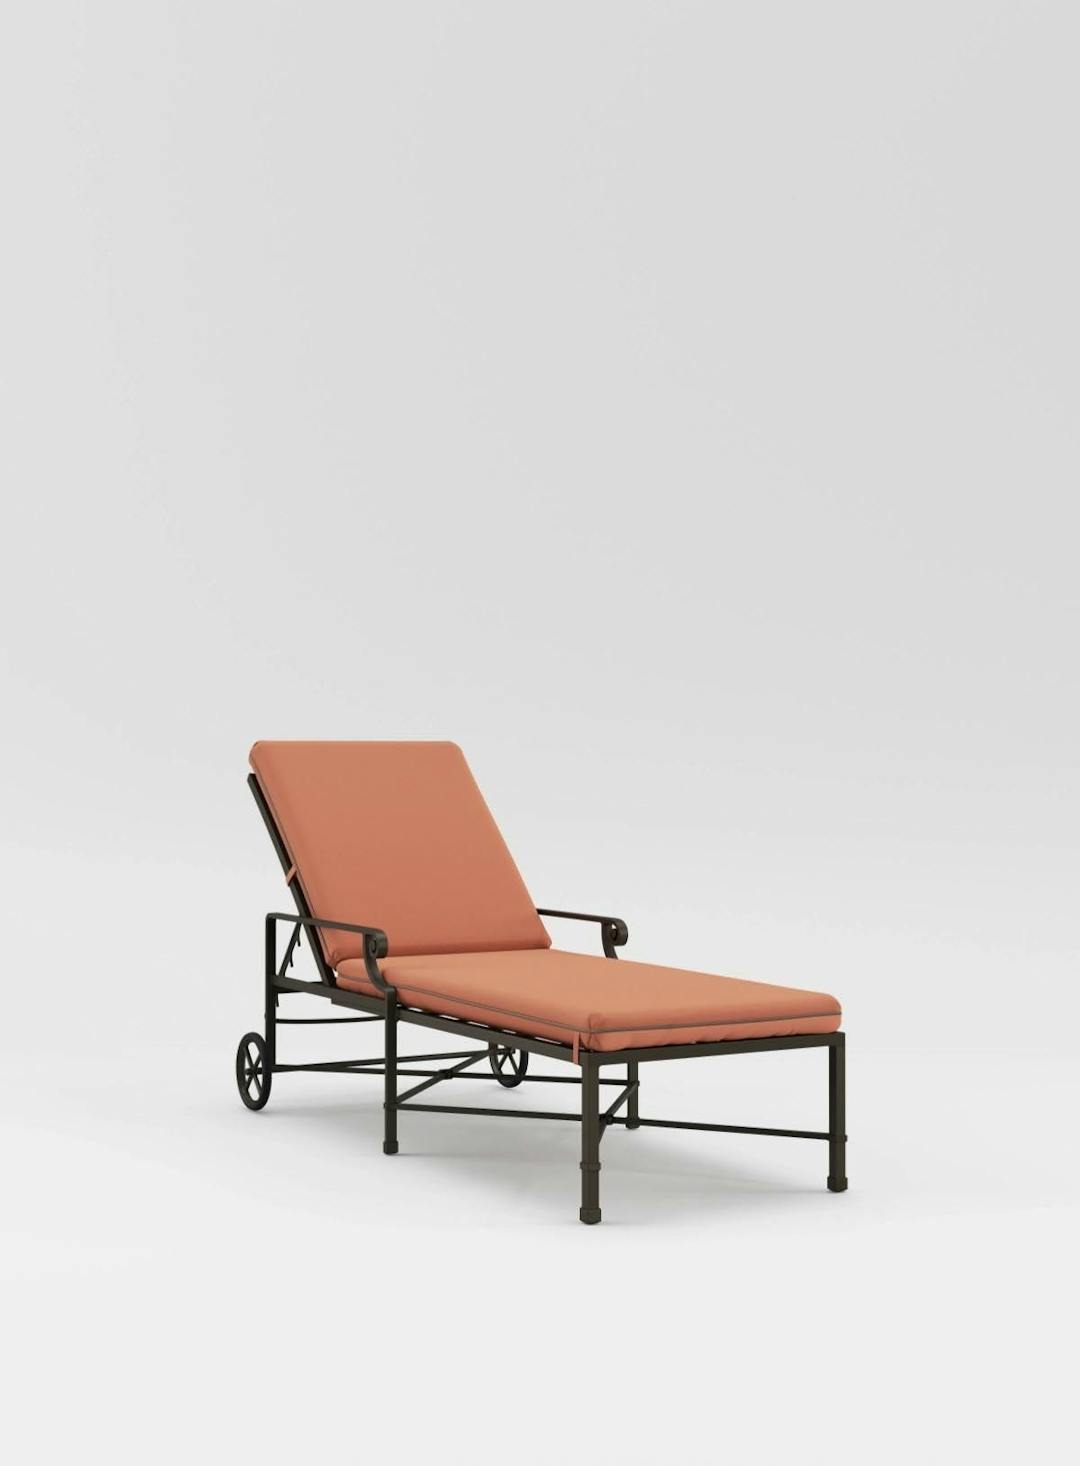 Venetian Adjustable Chaise With Wheels